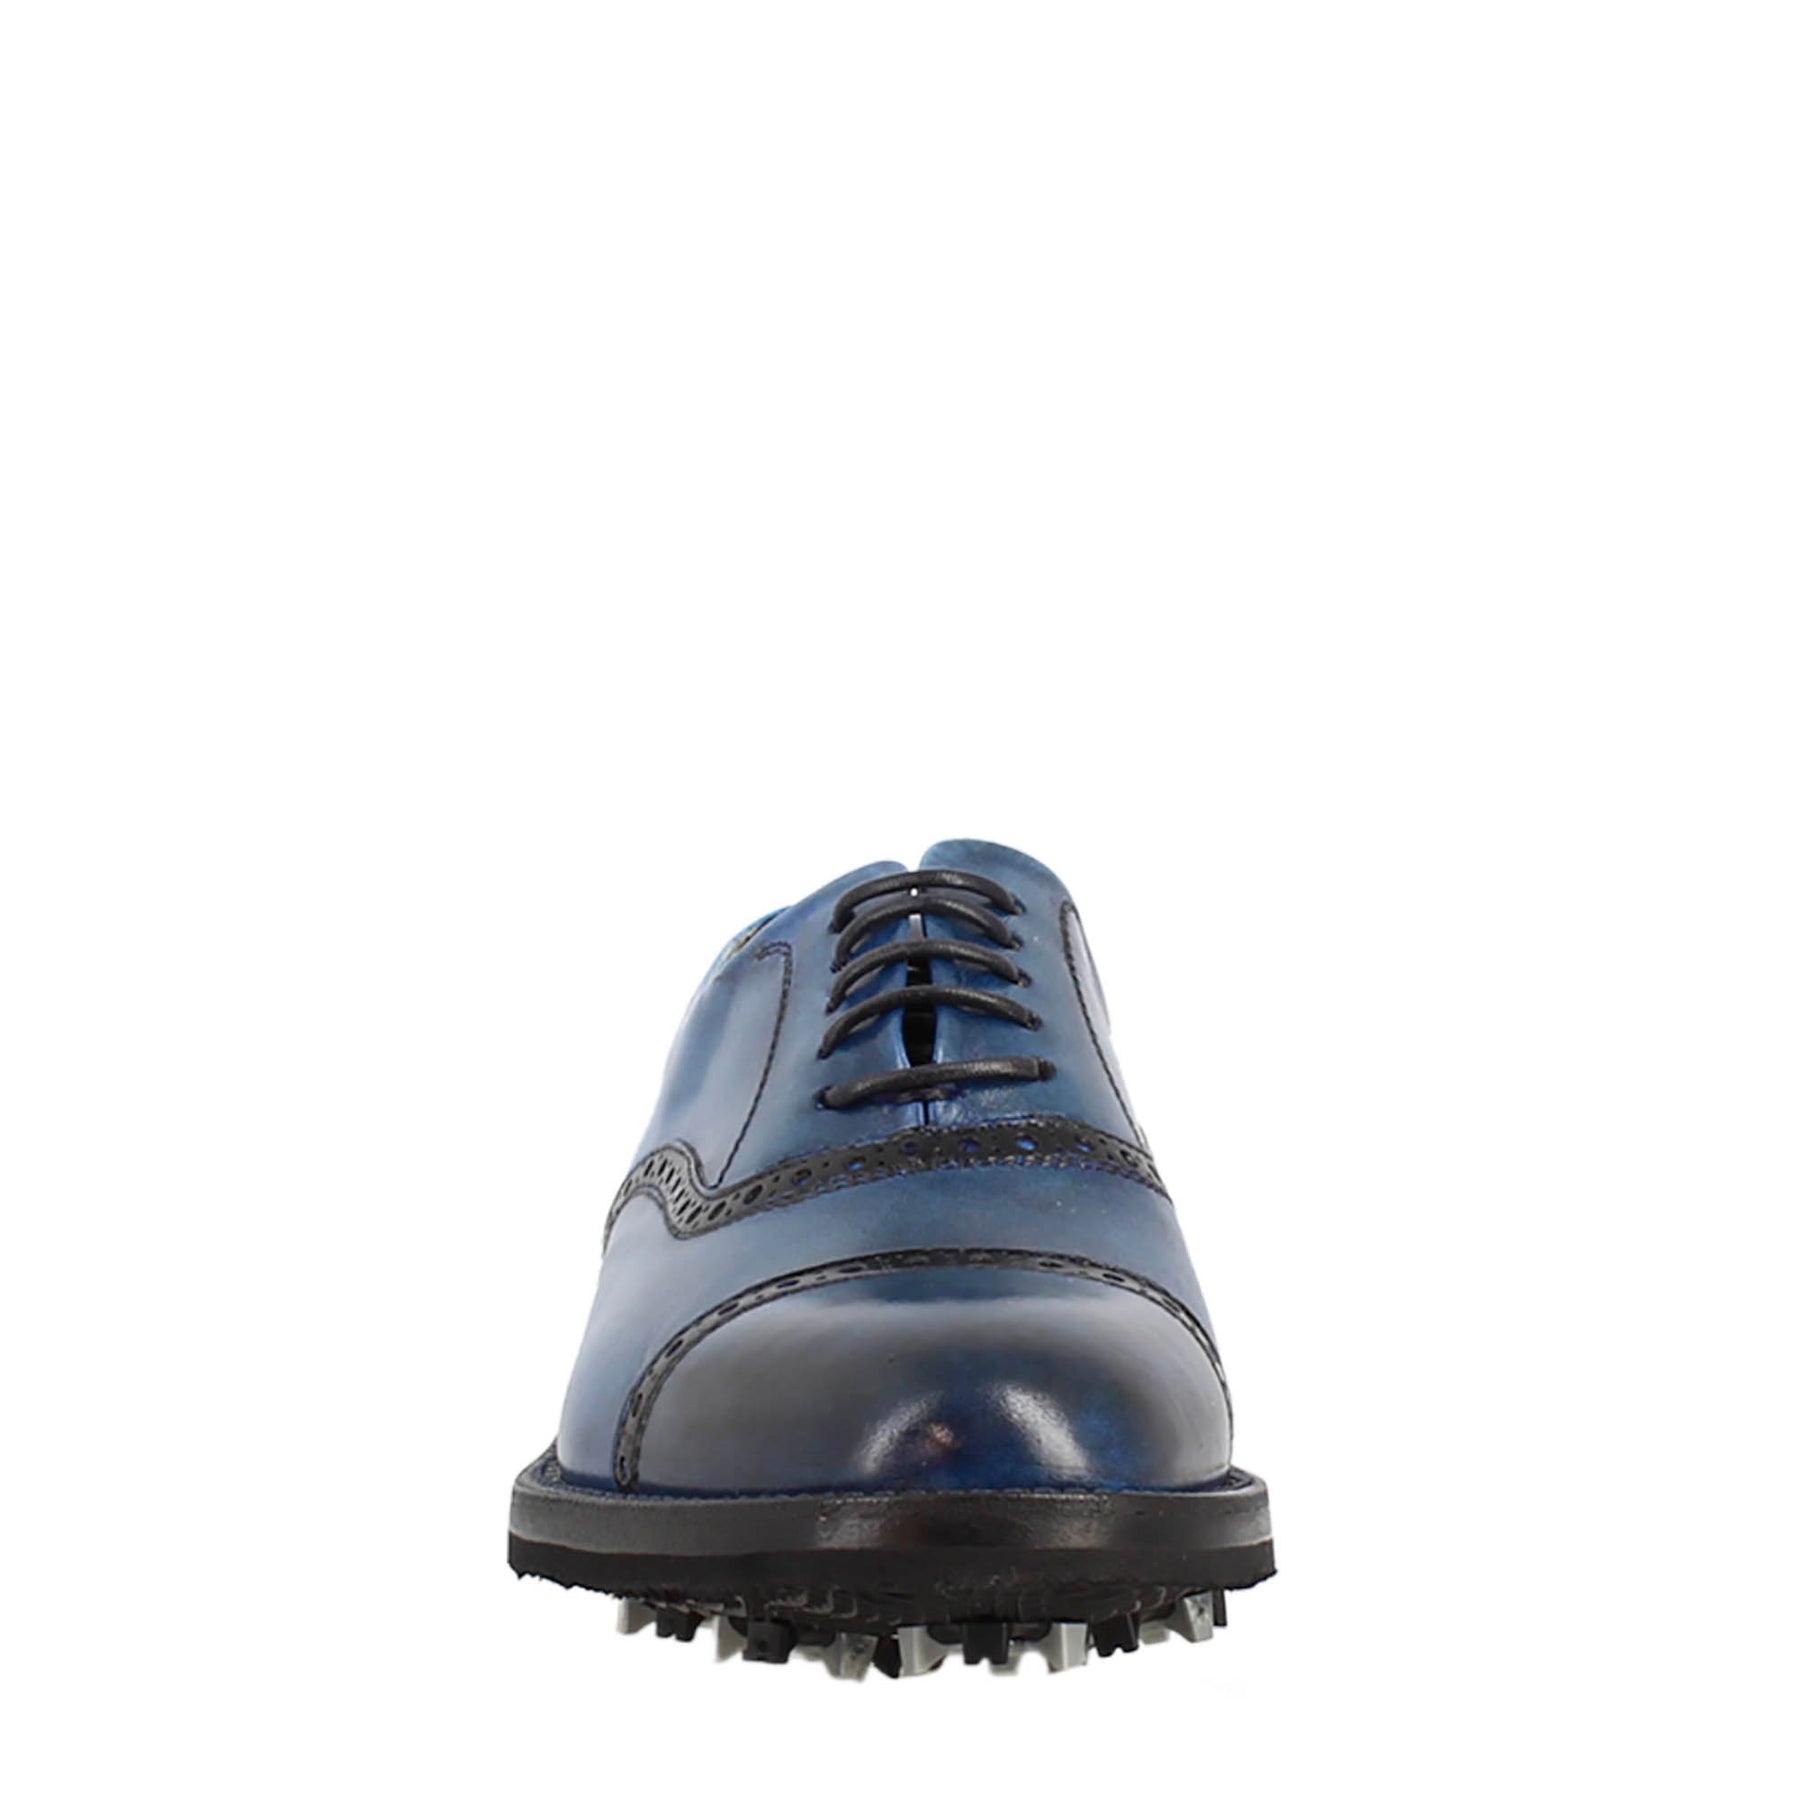 Women's golf shoes in blue leather handcrafted brogue details